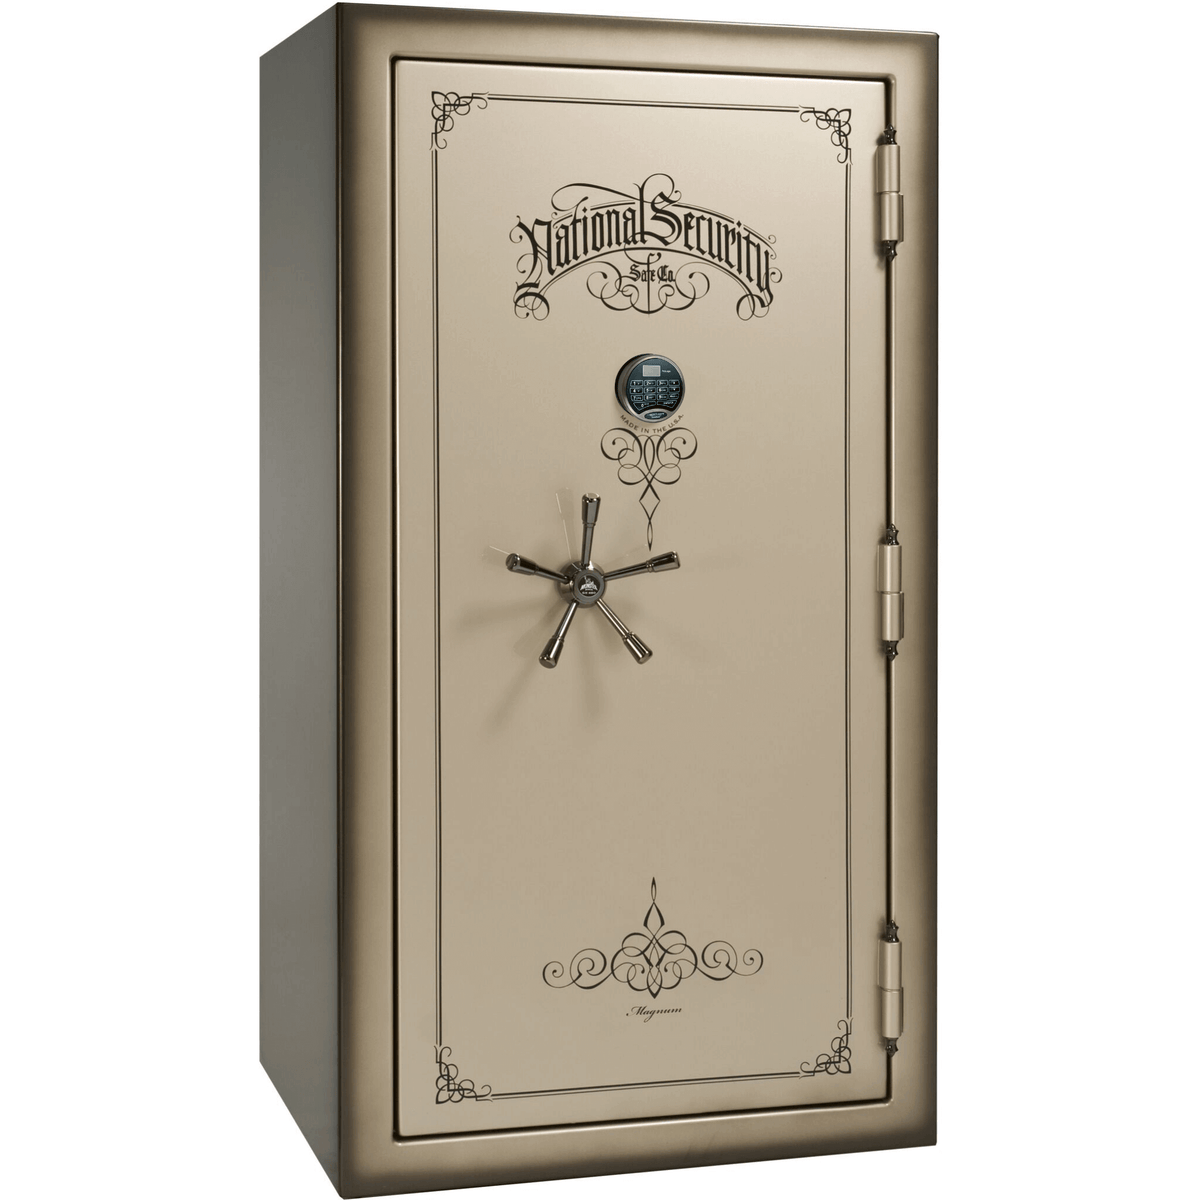 Liberty Safe National Magnum 40 in Champagne Feathered Edge Gloss with Black Chrome Electronic Lock, closed door.